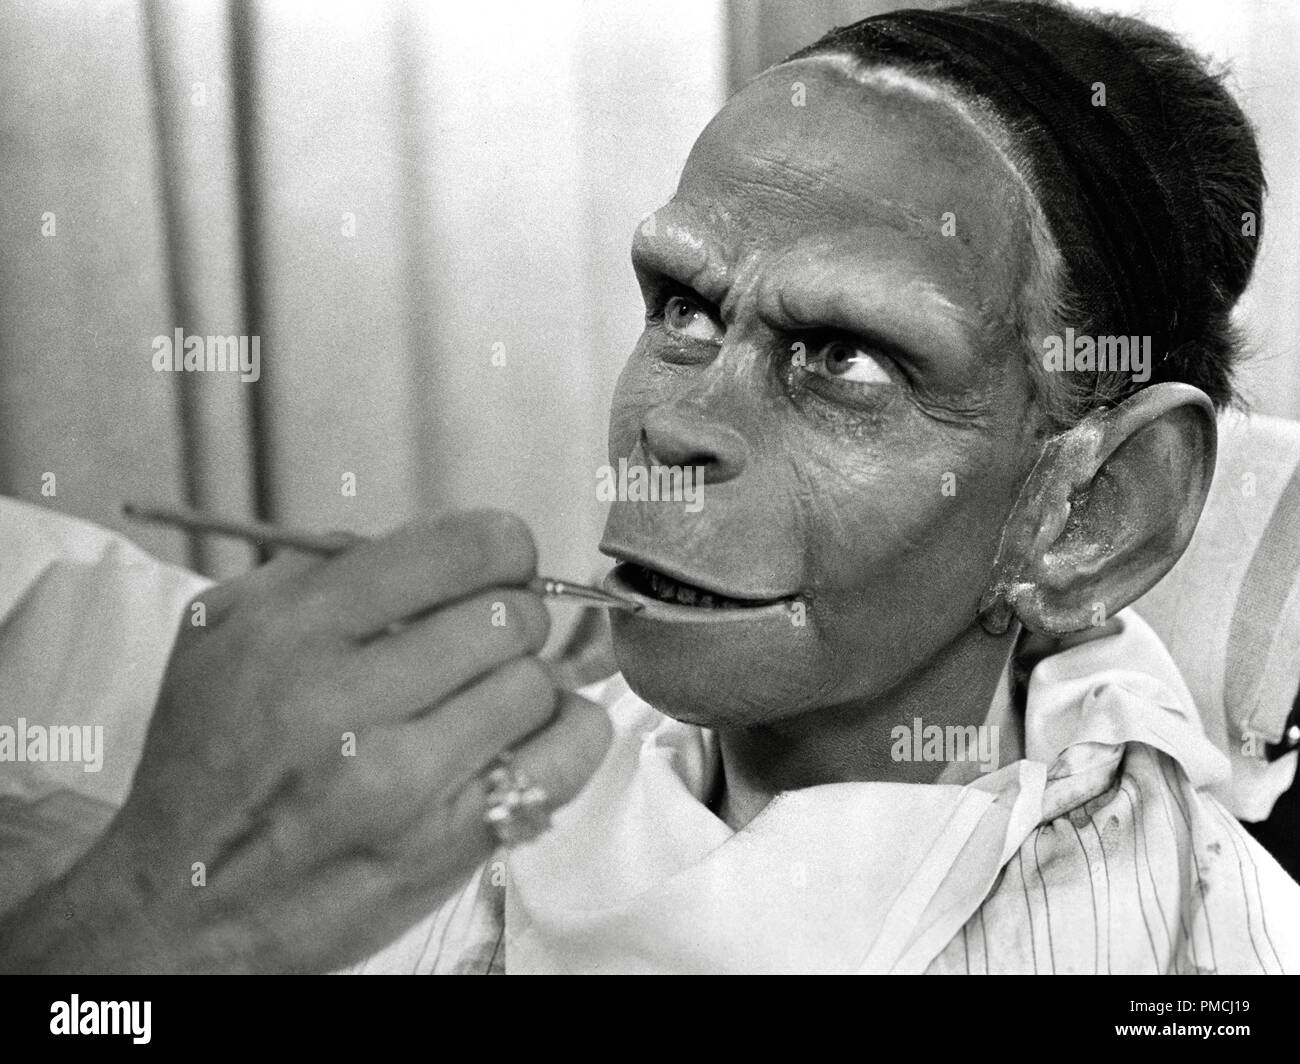 Kim Hunter,  'Planet of the Apes'  (1968) 20th Century Fox   File Reference # 33650 142THA  For Editorial Use Only -  All Rights Reserved Stock Photo